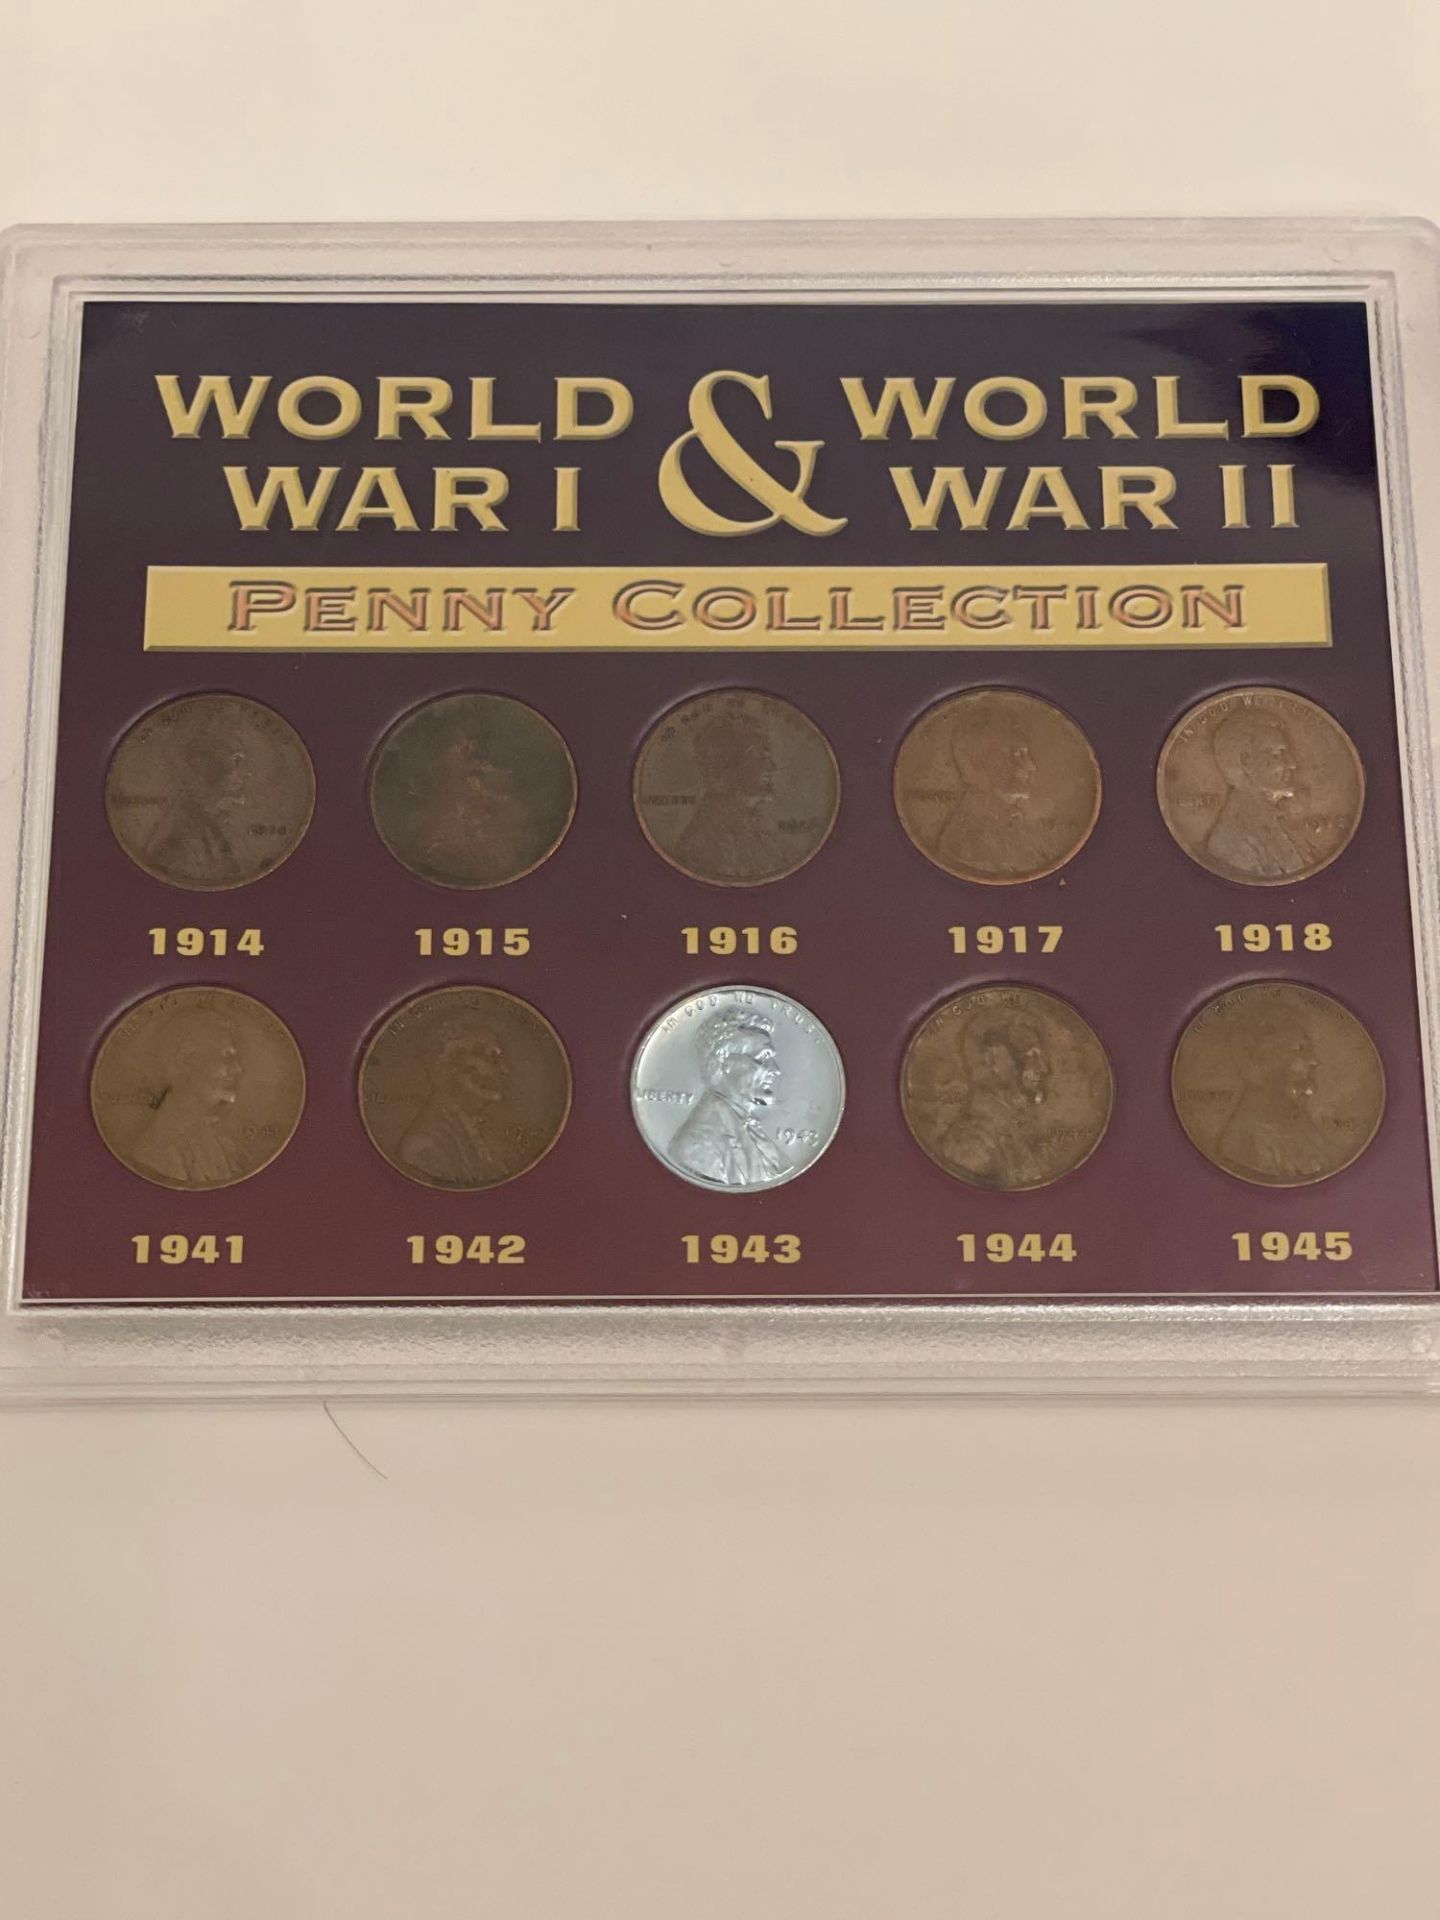 WWI & WWII Penny Collection: 1914-1918, 1941-1945